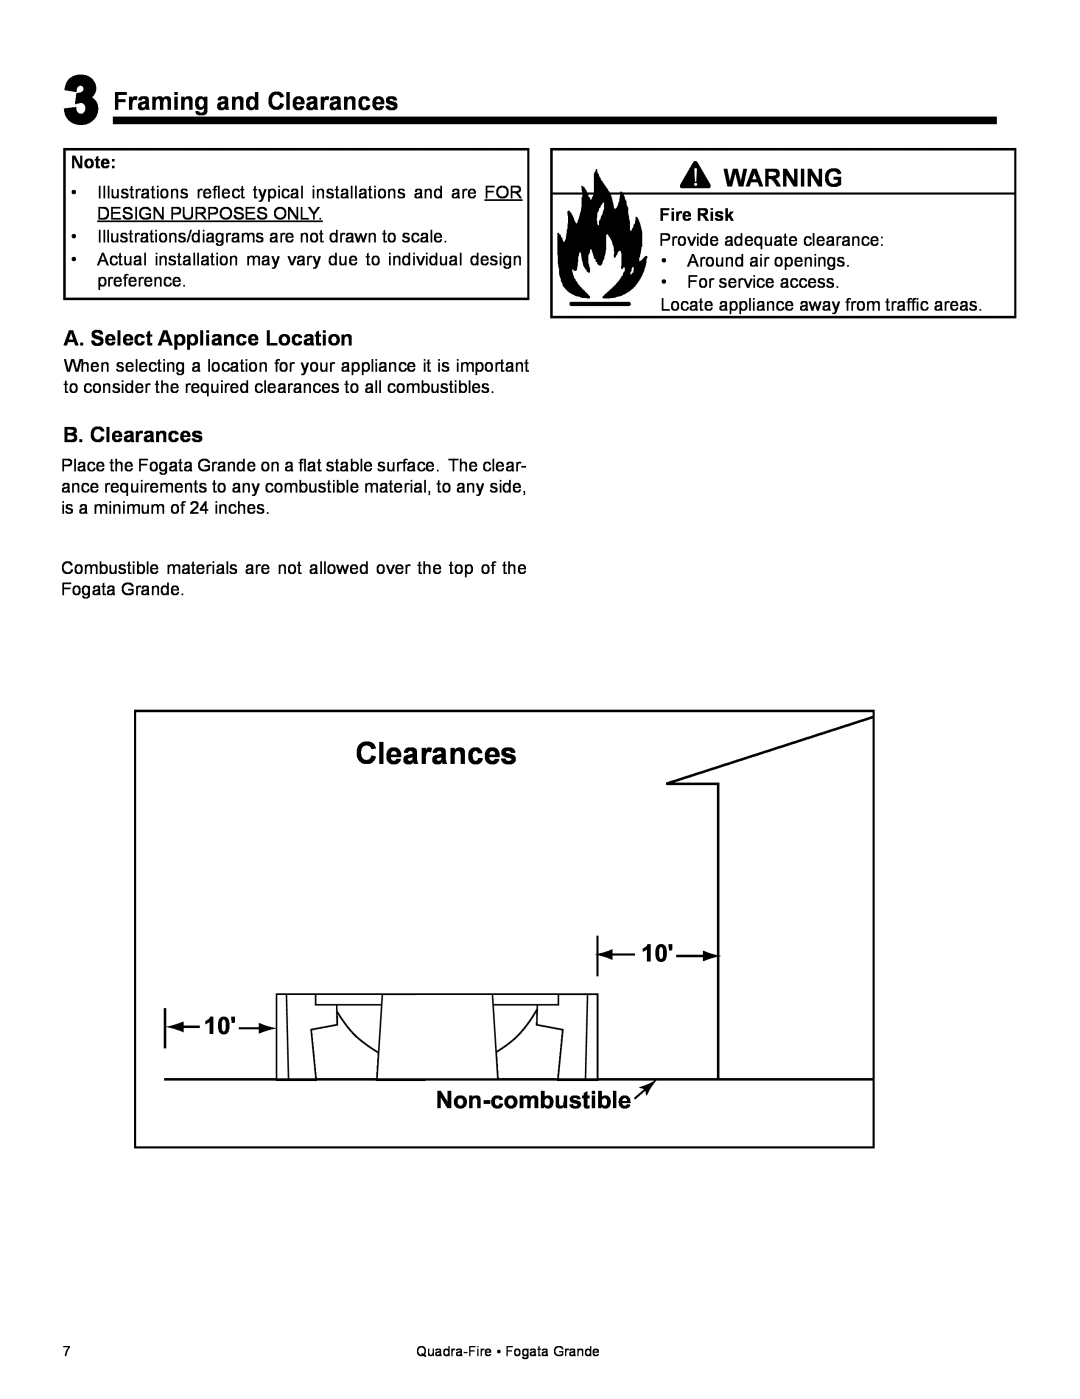 Quadra-Fire FG21SP-LP owner manual Framing and Clearances, Non-combustible, Fire Risk 